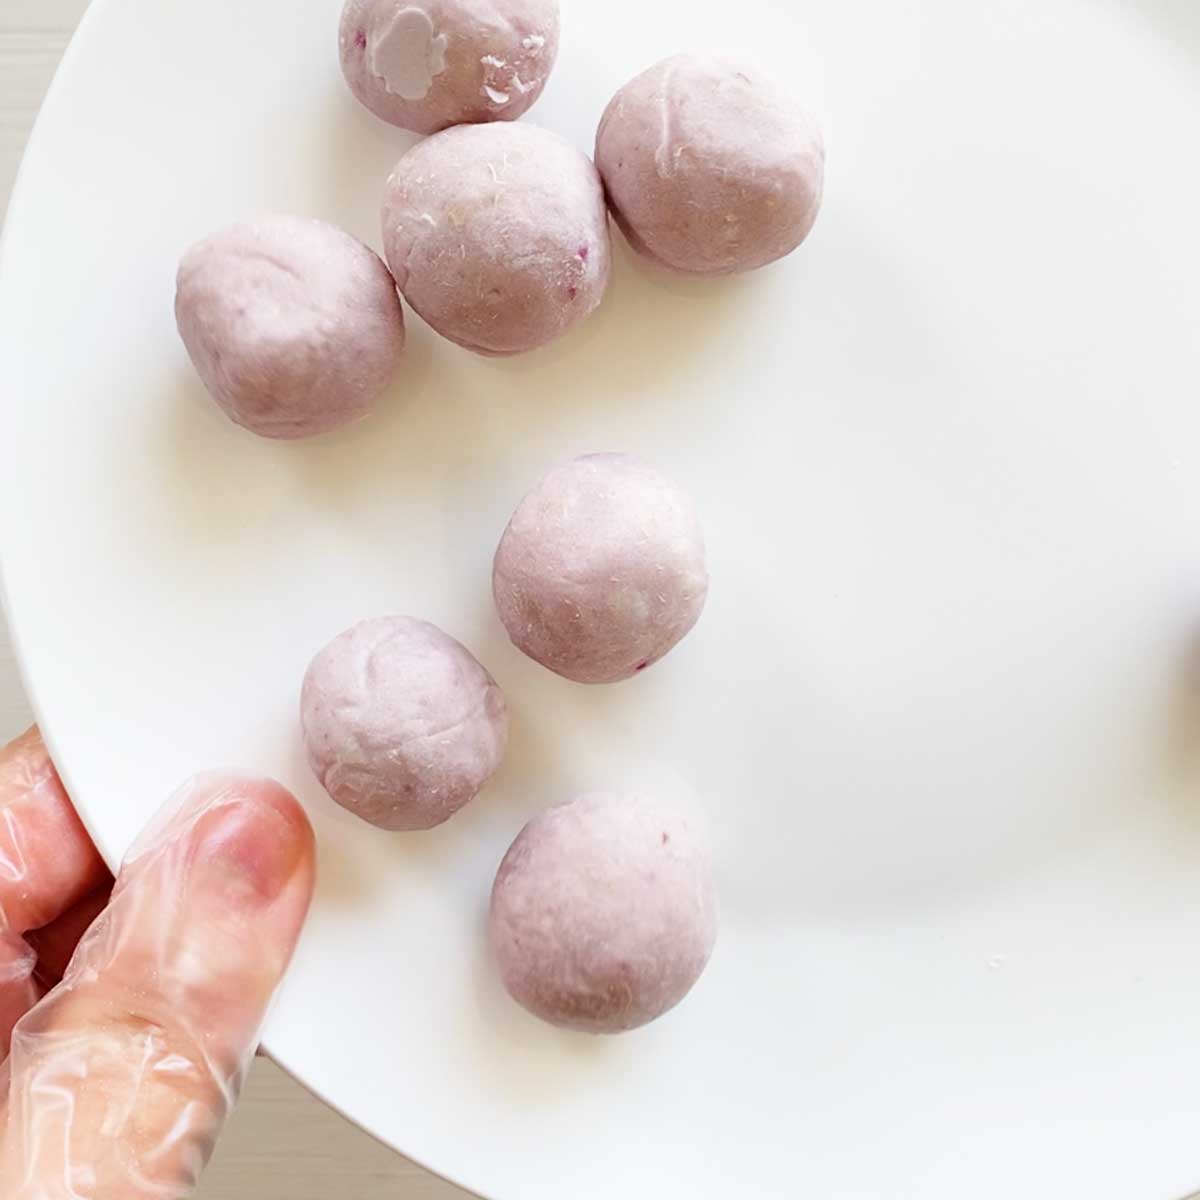 sweet taro paste filling rolled into balls